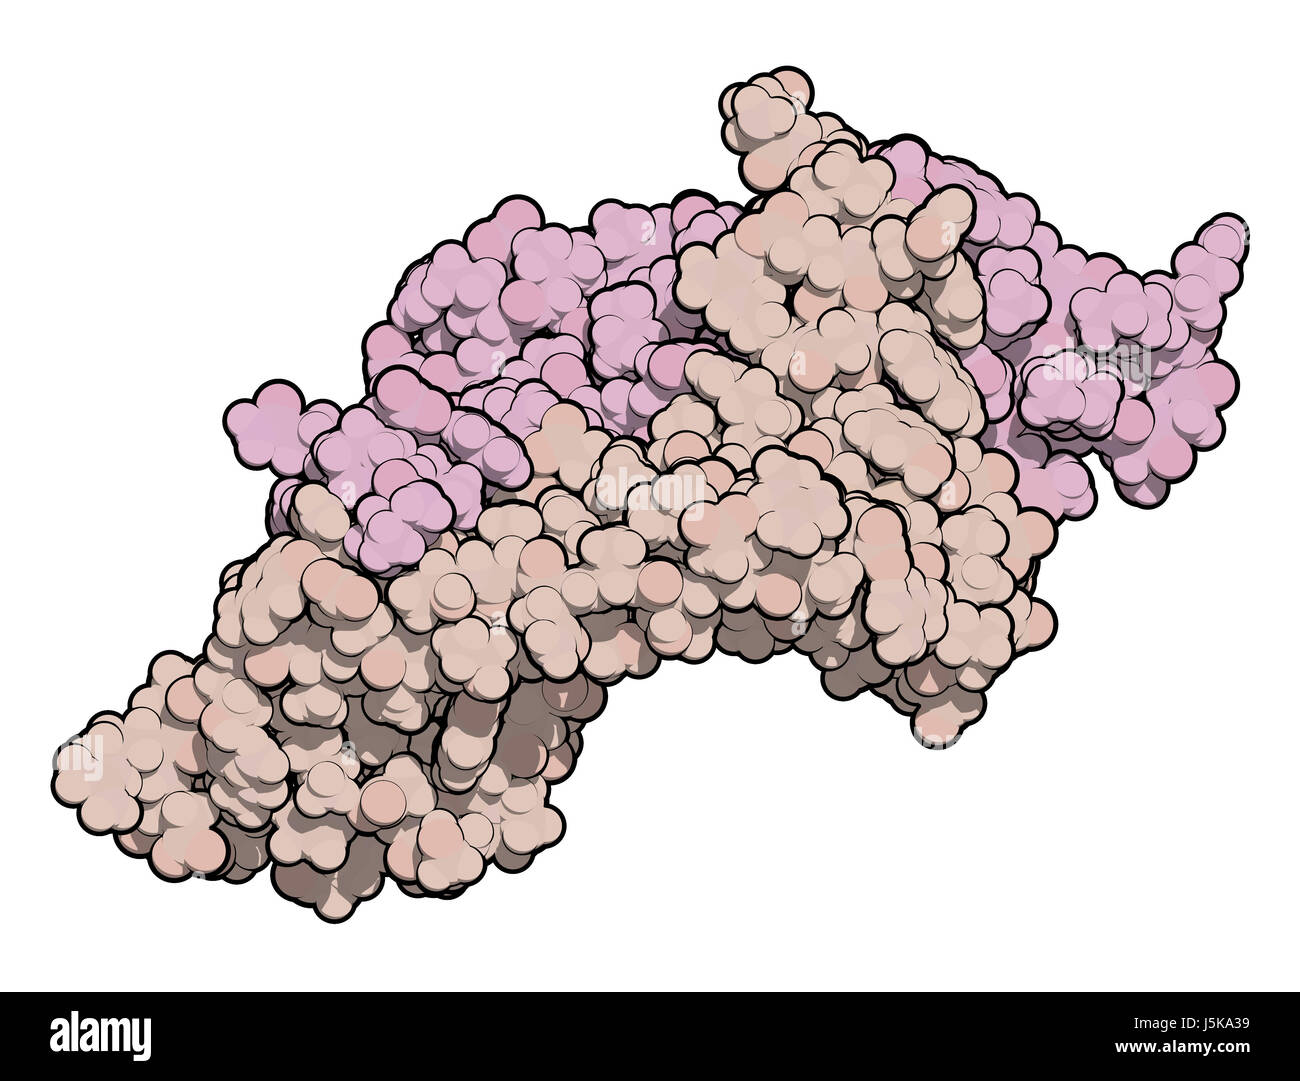 Placental growth factor (PlGF, receptor binding domain) protein. 3D rendering based on protein data bank entry 1rv6. Stock Photo